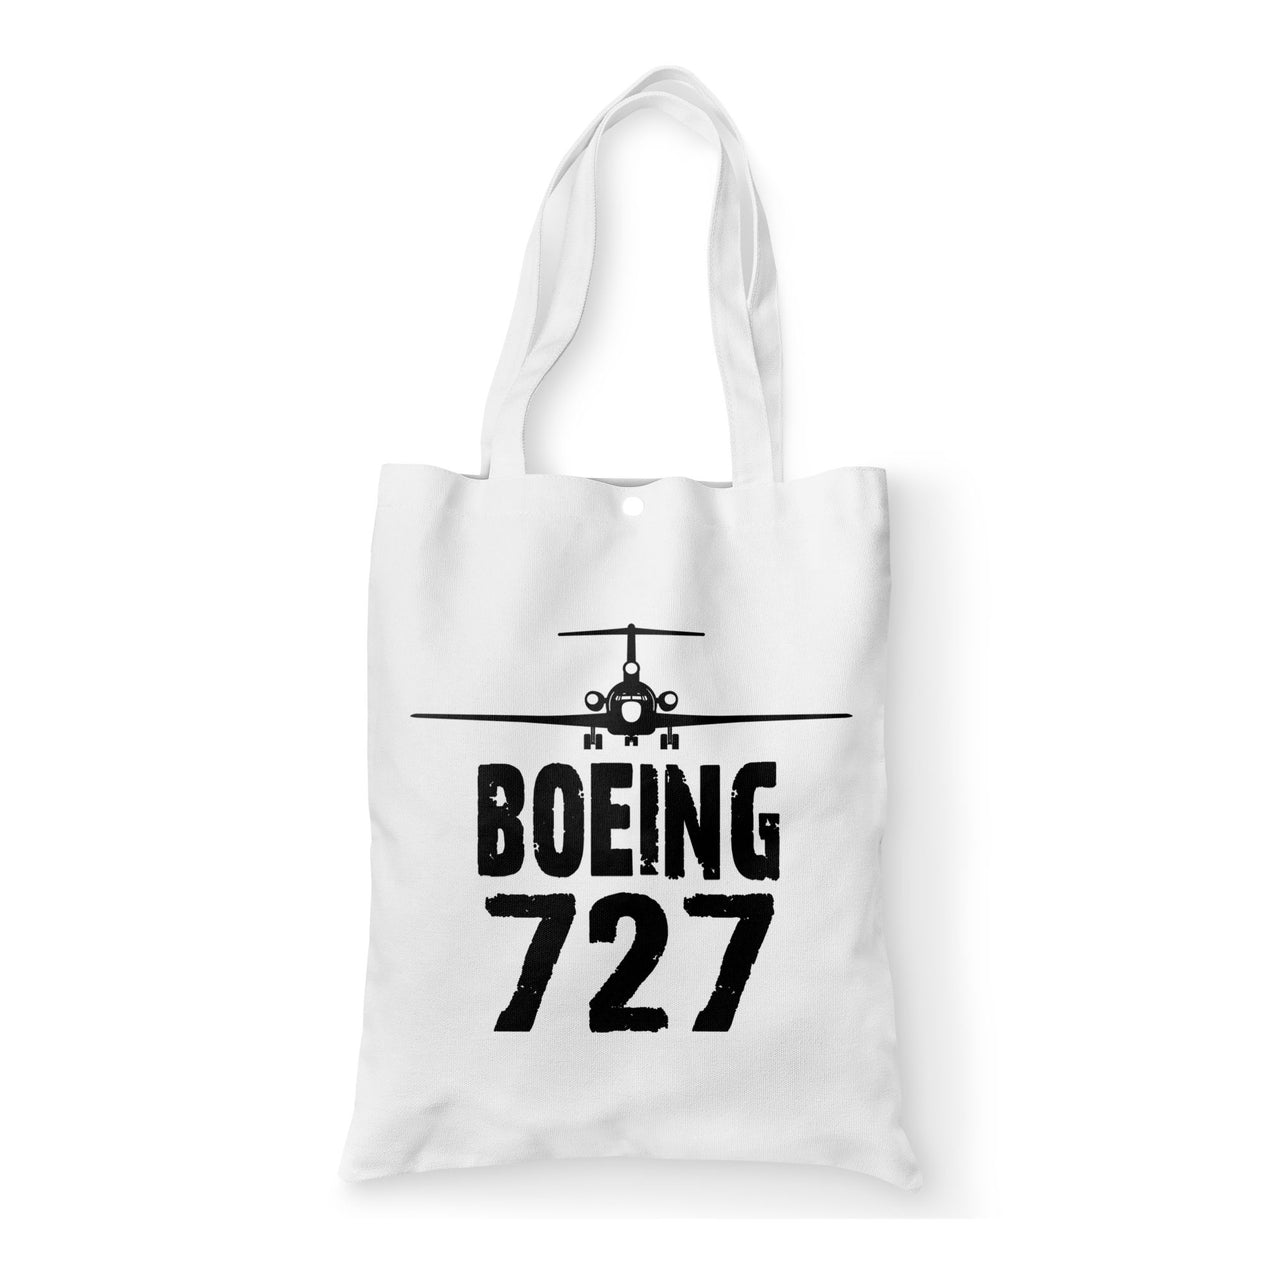 Boeing 727 & Plane Designed Tote Bags